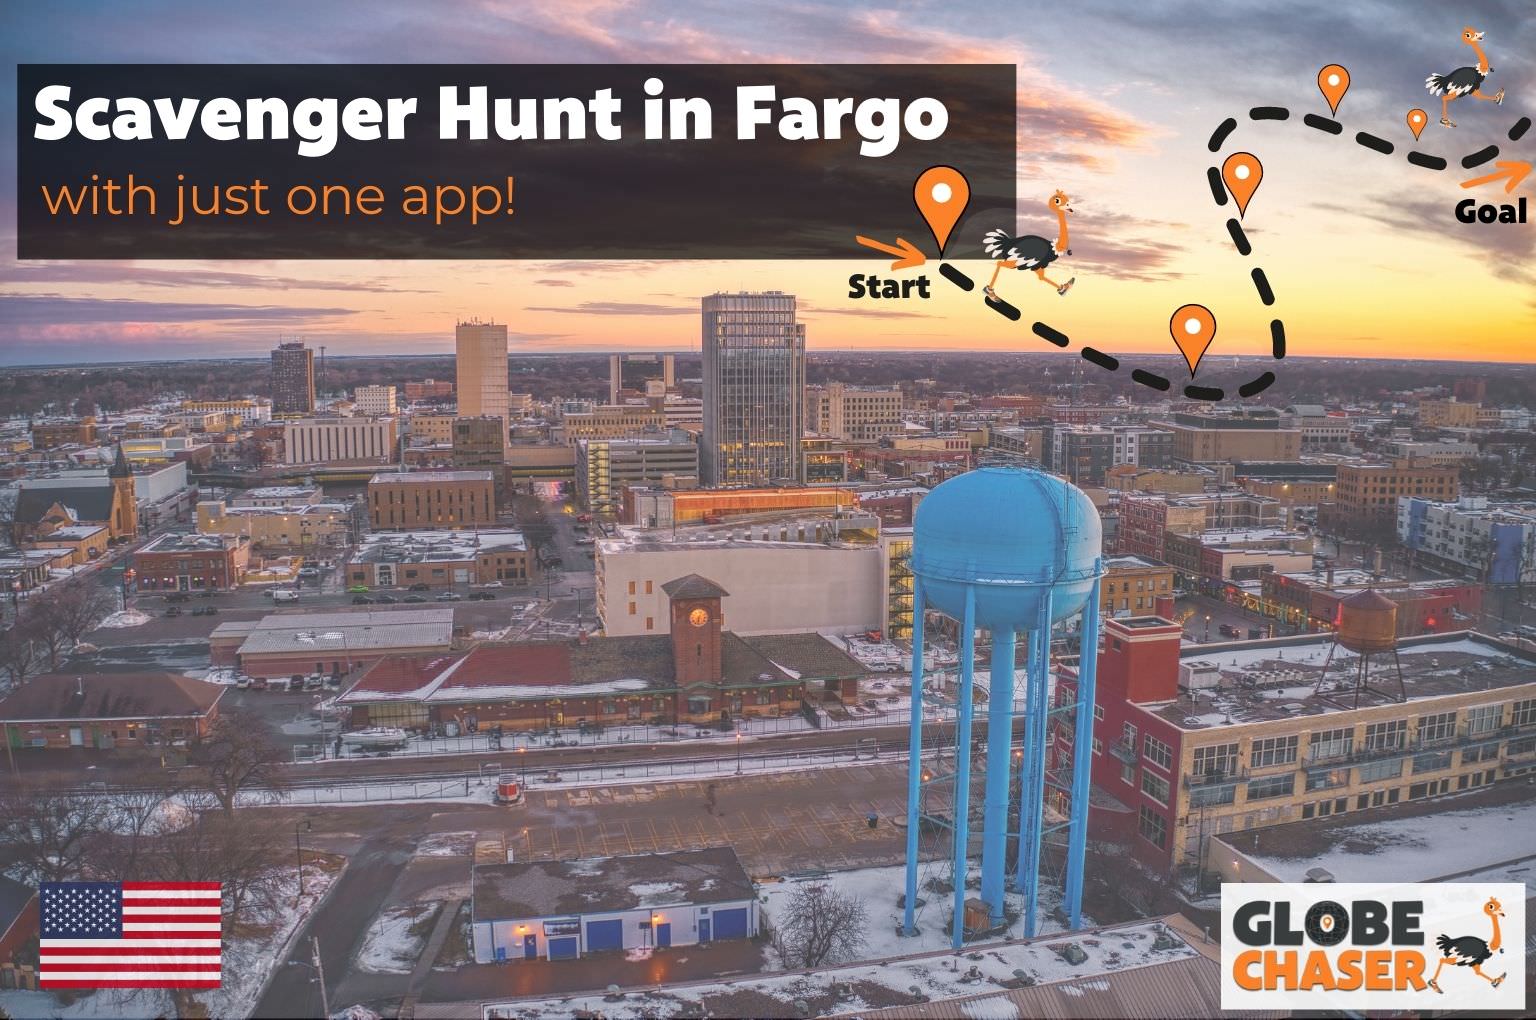 Scavenger Hunt in Fargo, USA - Family Activities with the Globe Chaser App for Outdoor Fun